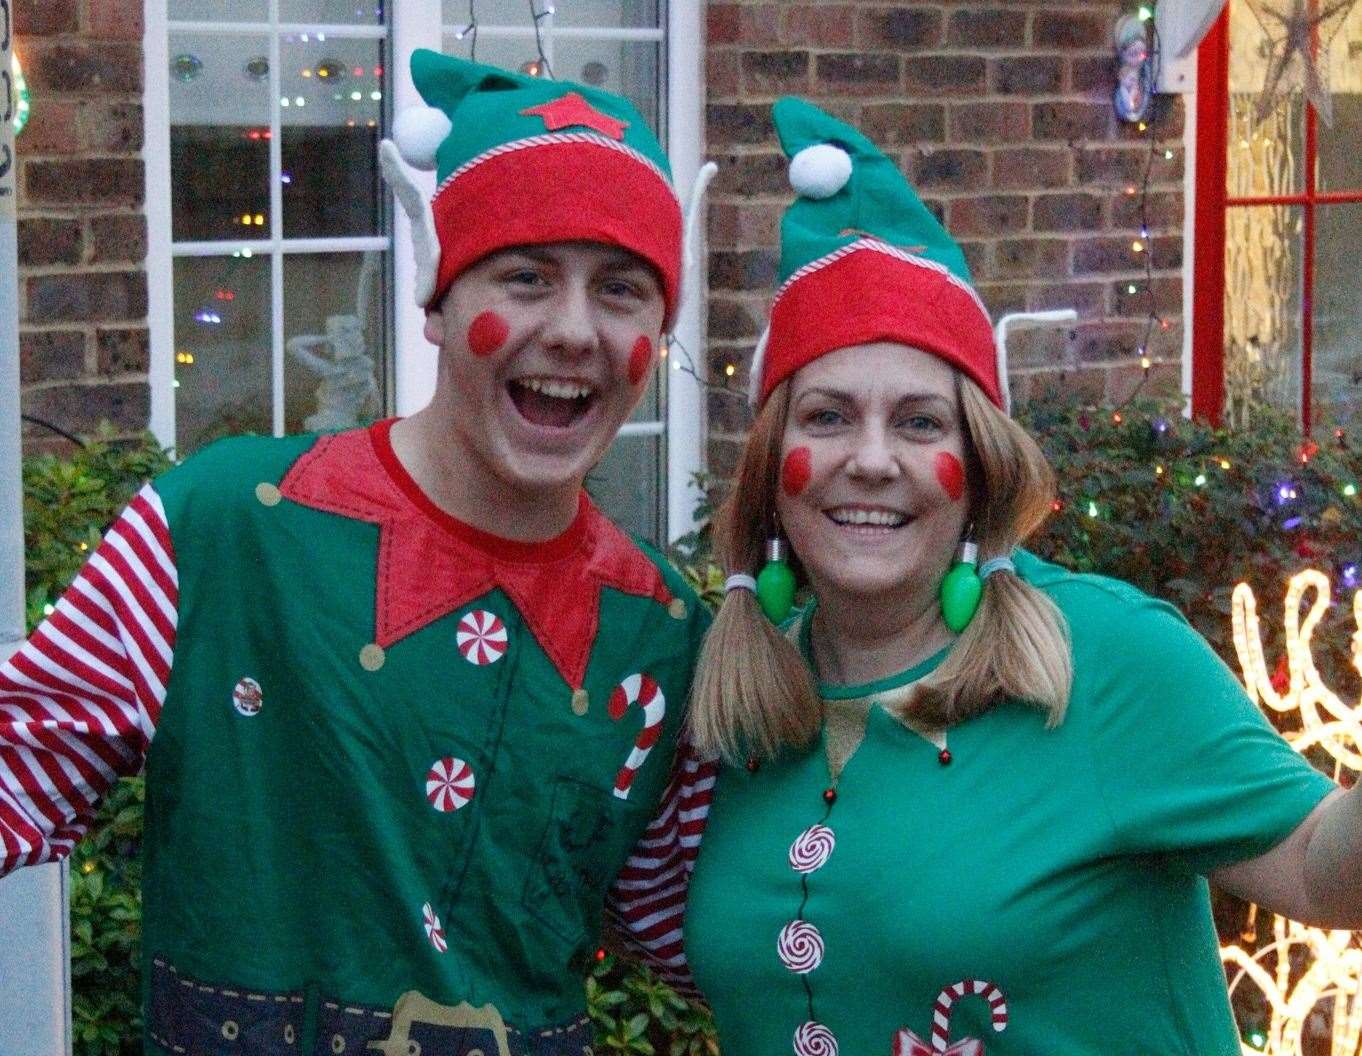 The pair dressed as elves over Christmas